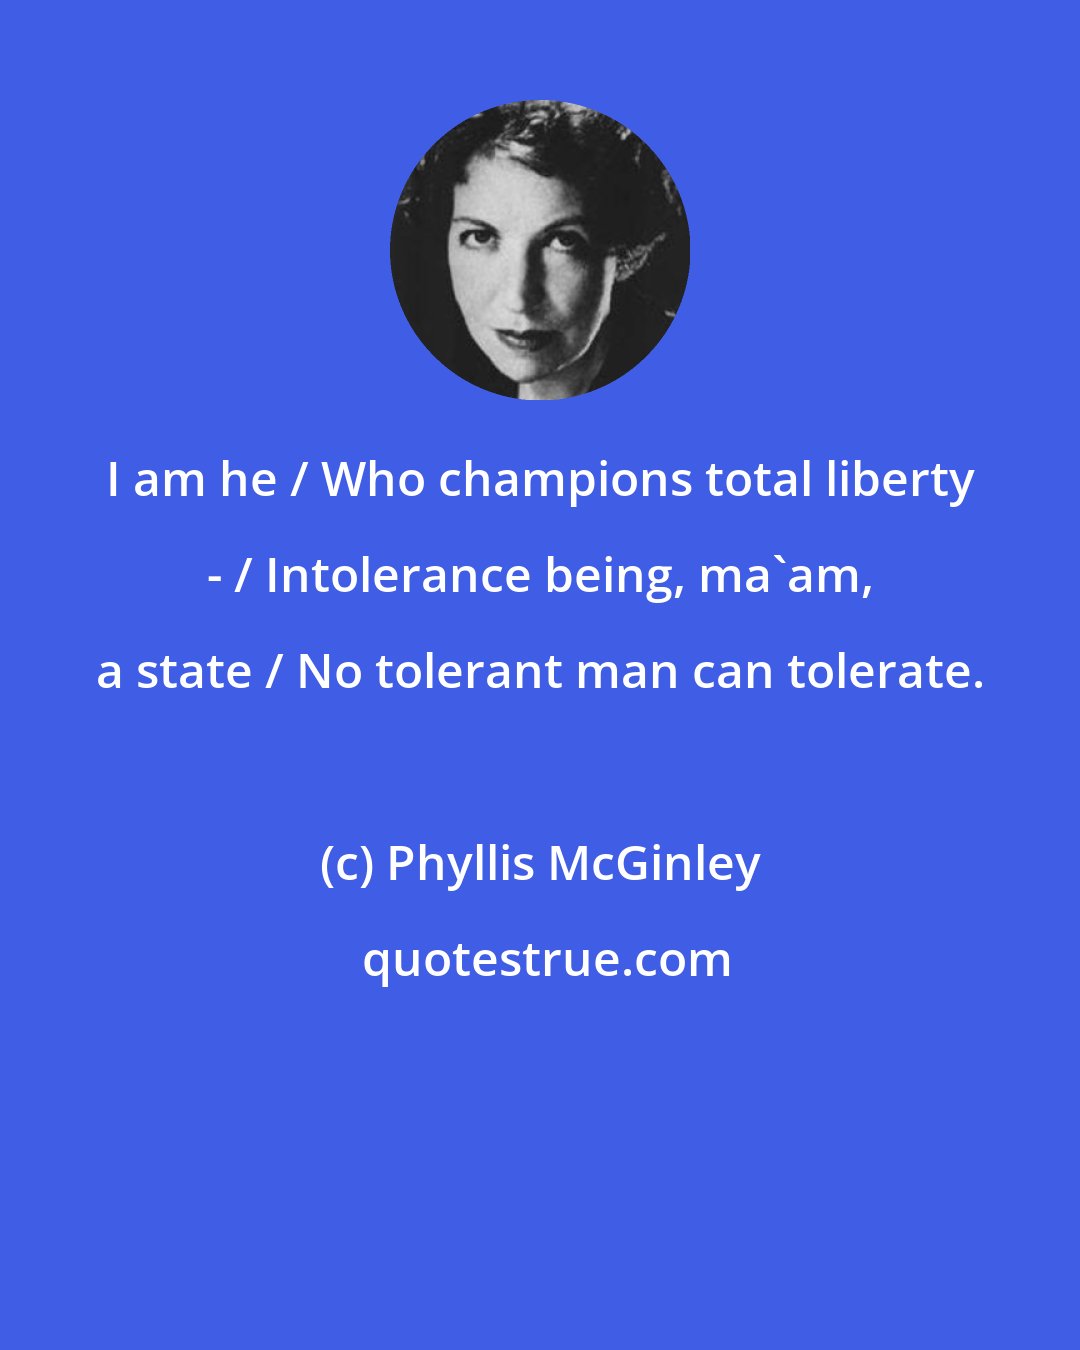 Phyllis McGinley: I am he / Who champions total liberty - / Intolerance being, ma'am, a state / No tolerant man can tolerate.